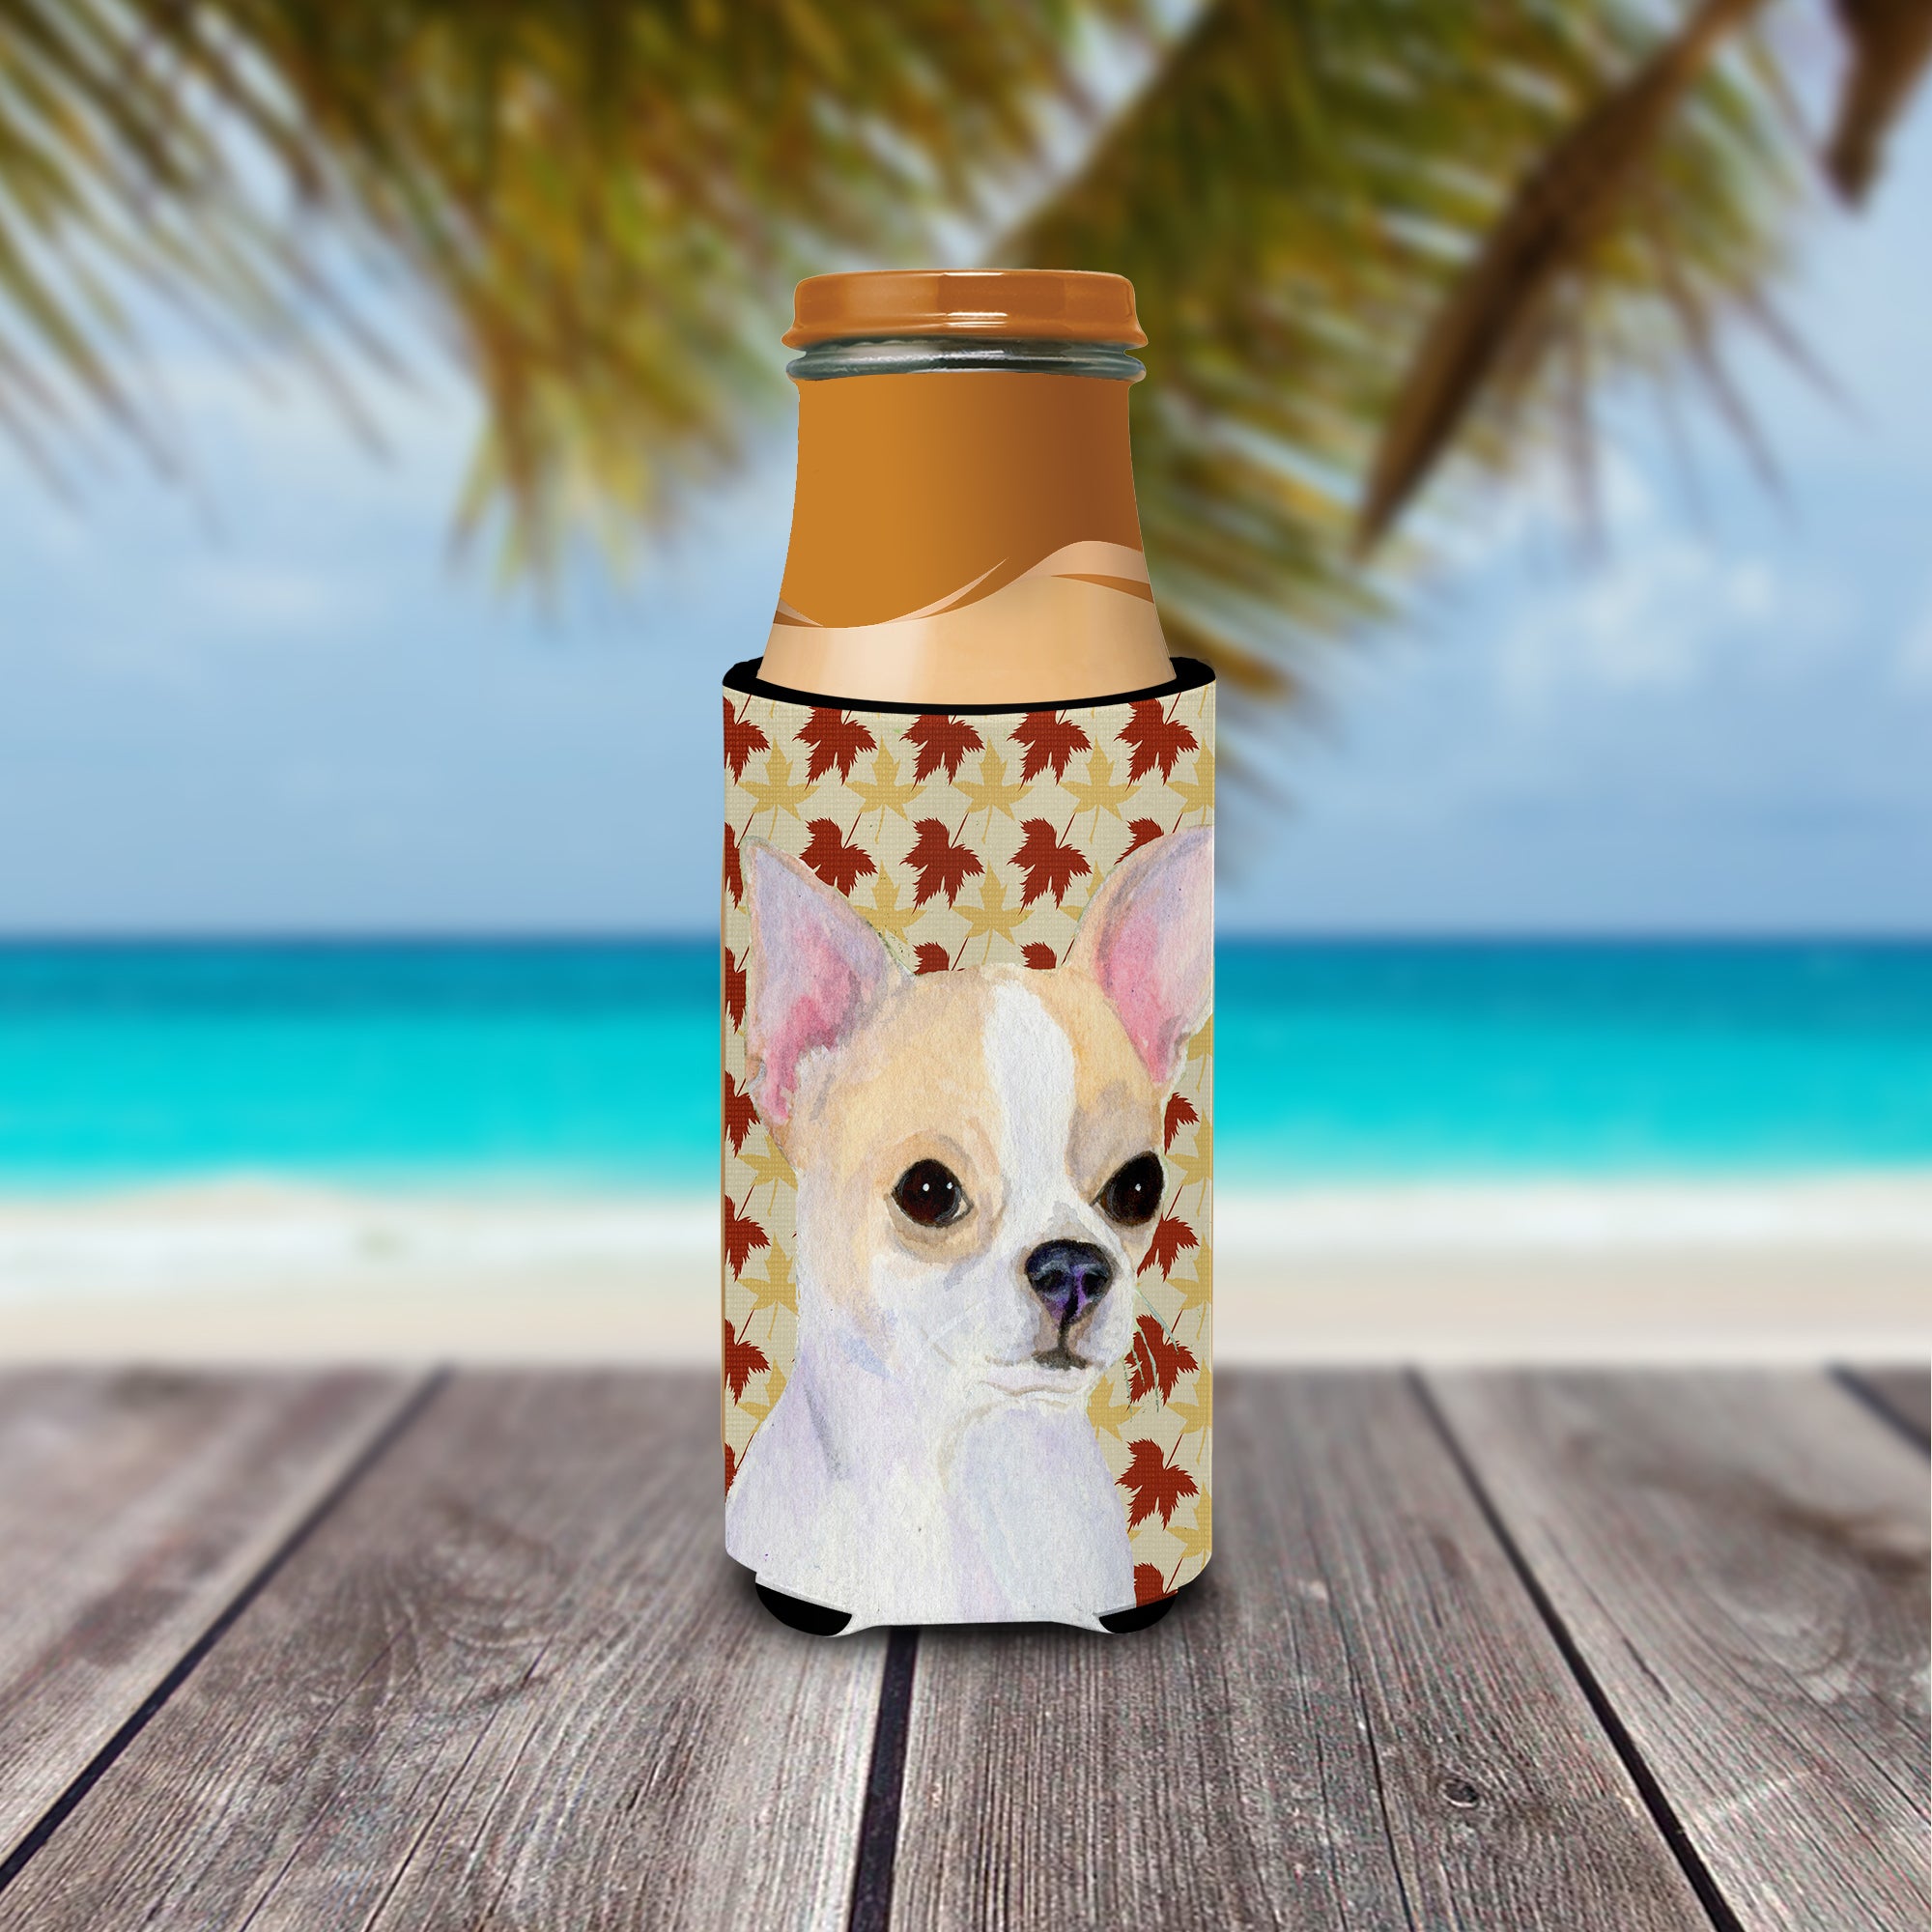 Chihuahua Fall Leaves Portrait Ultra Beverage Insulators for slim cans SS4382MUK.